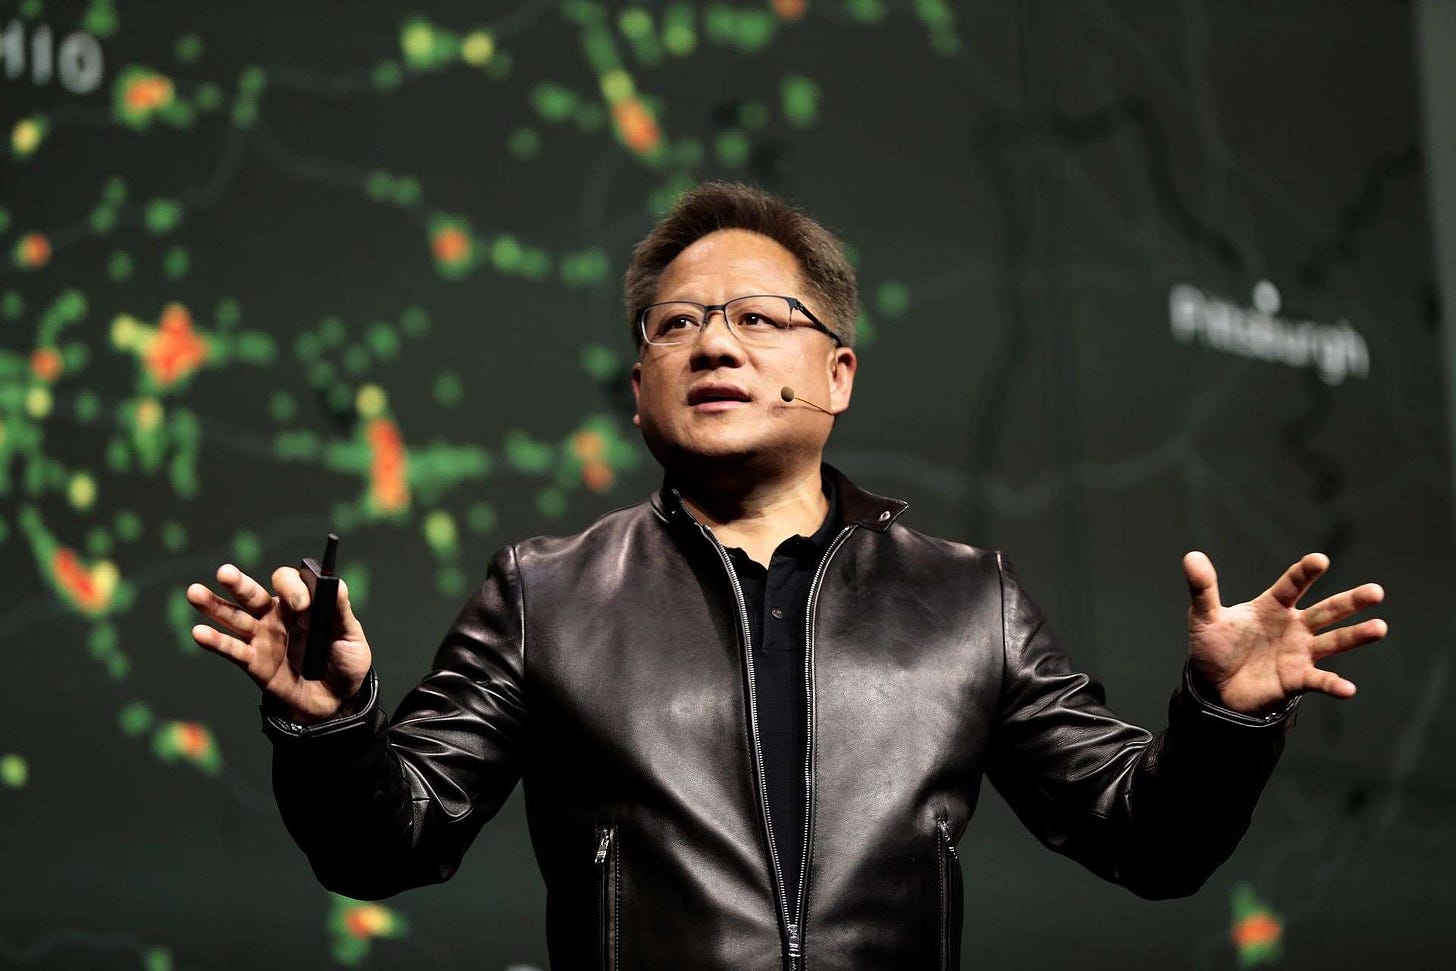 NVIDIA CEO Jensen Huang's message to Cambridge about his plans for Arm